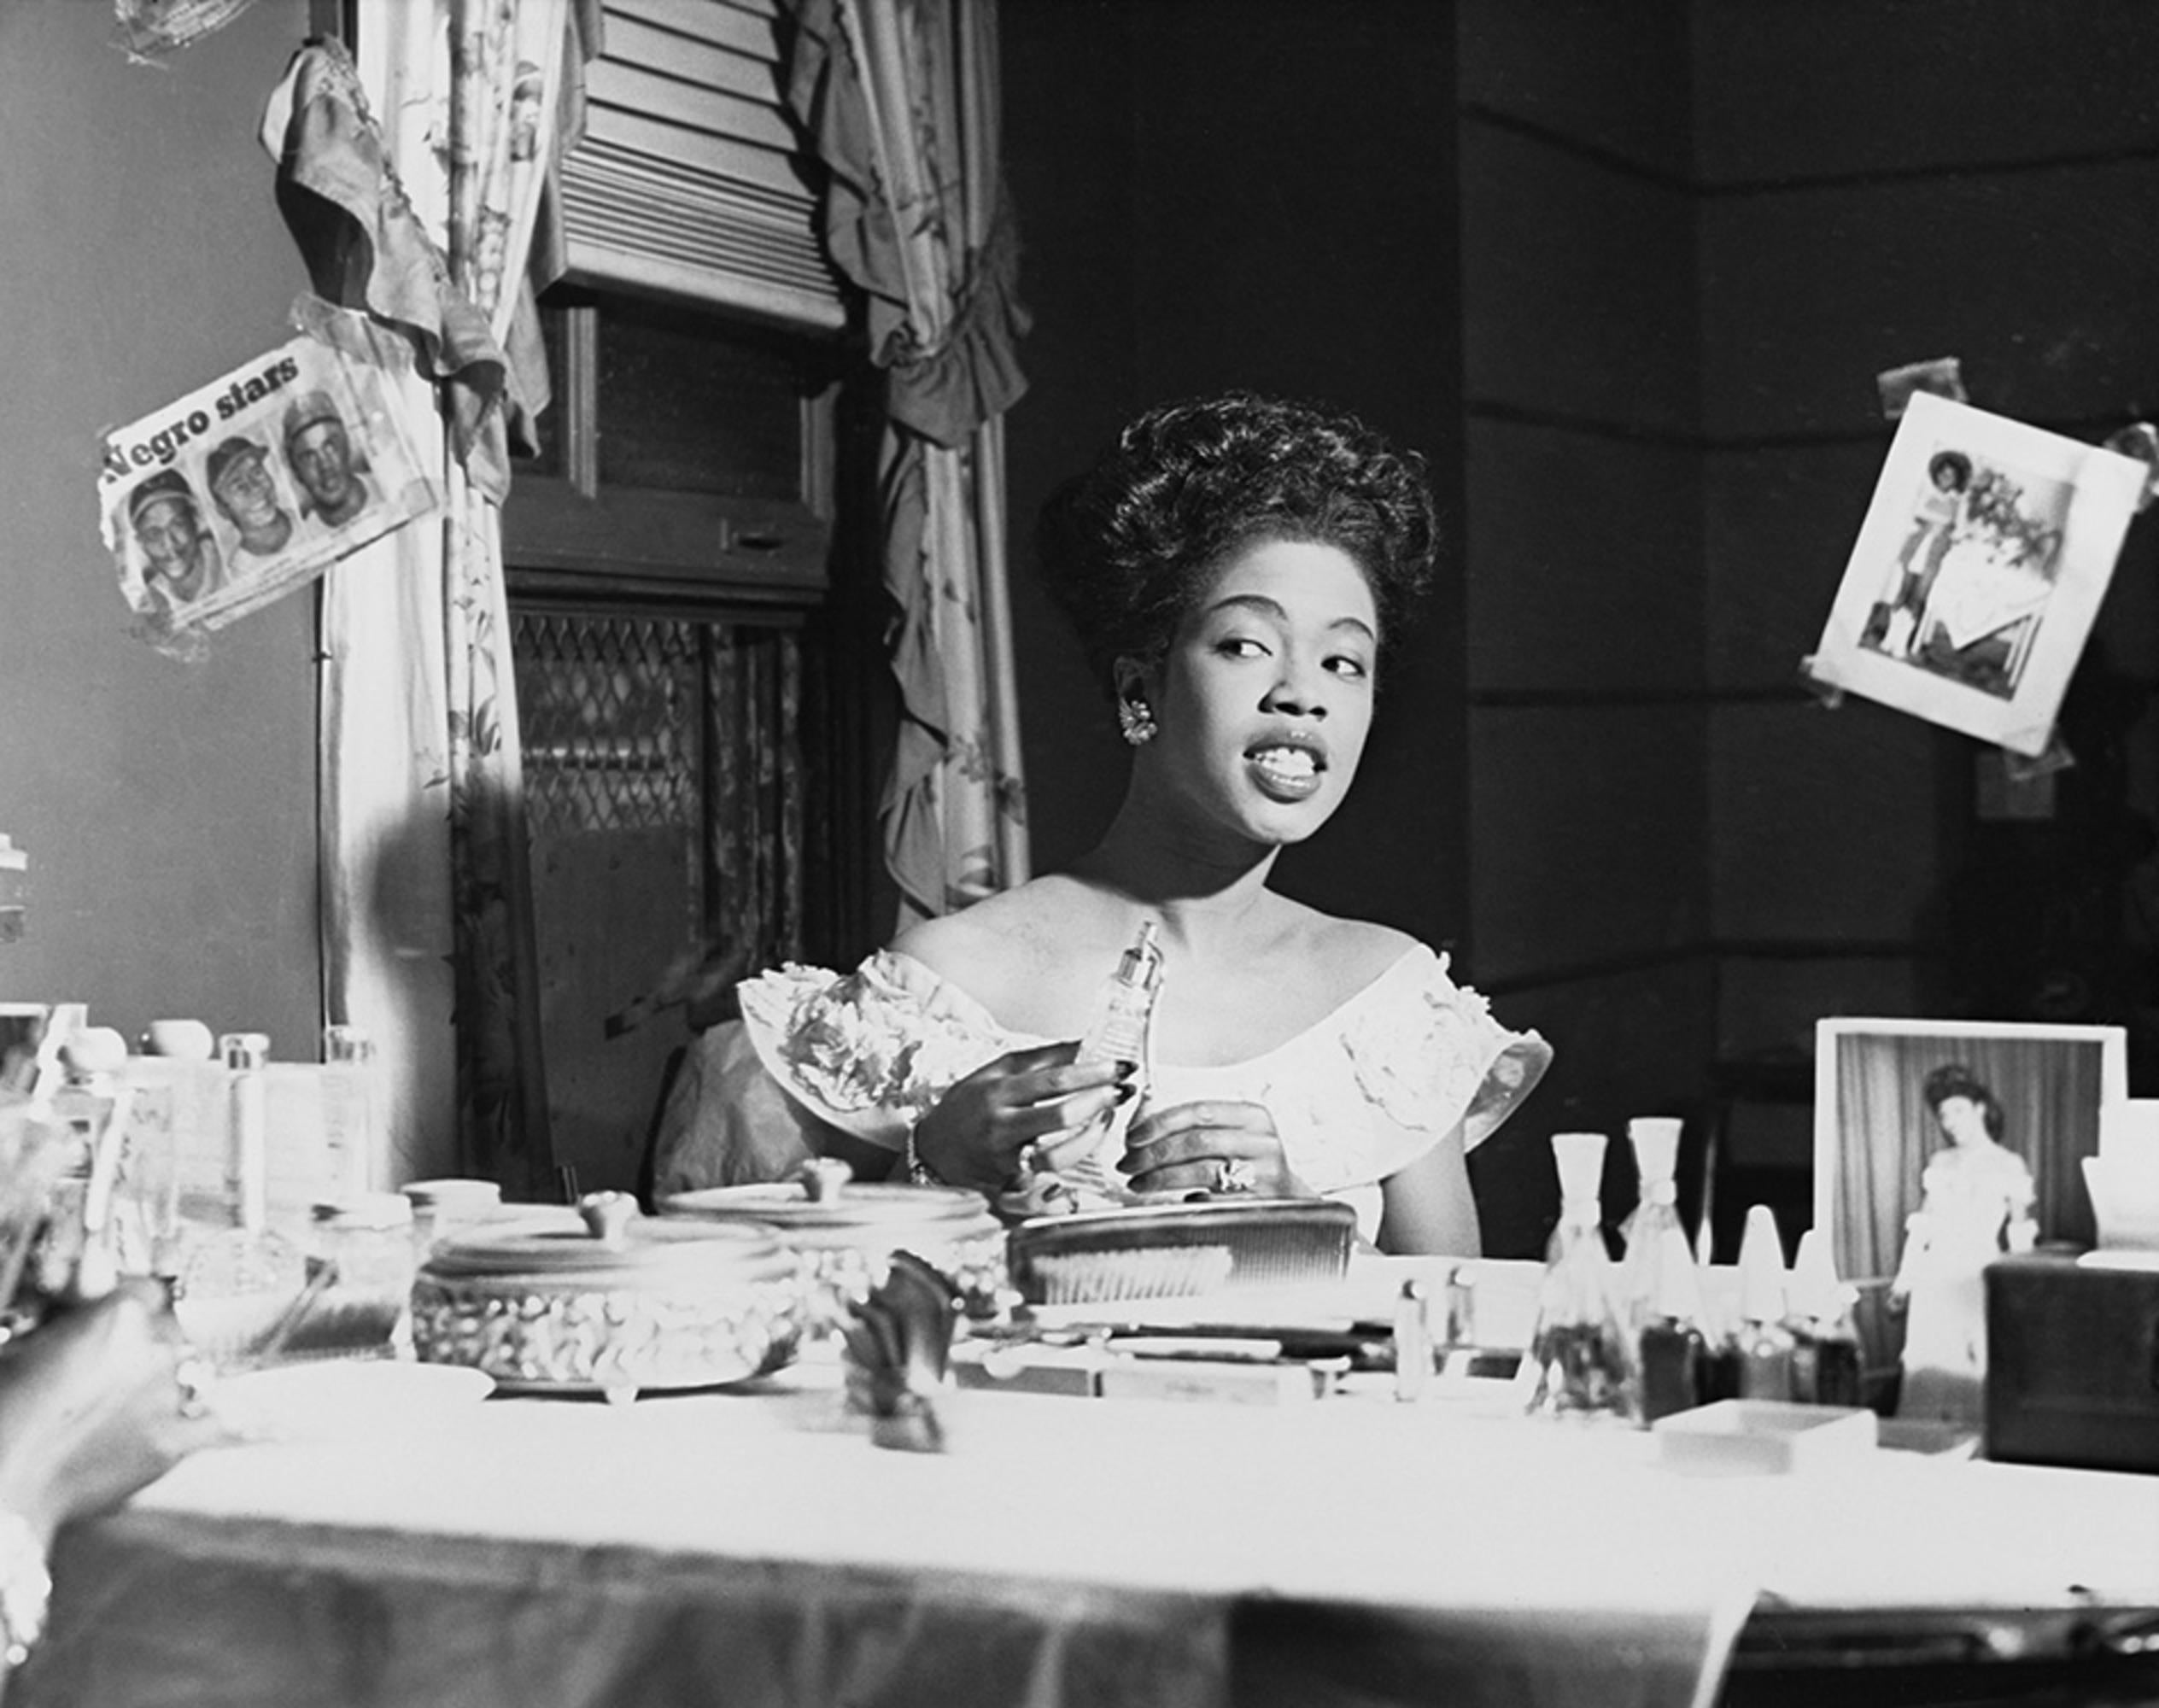 Estate-stamped, gelatin-print silver

A portrait of American jazz singer and Grammy Award winner, Sarah Vaughan in her dressing room at the Chicago theatre, IL, 1948.

Available sizes: 
16”x20" Edition of 25
20”x24" Edition of 25
30”x40" Edition of